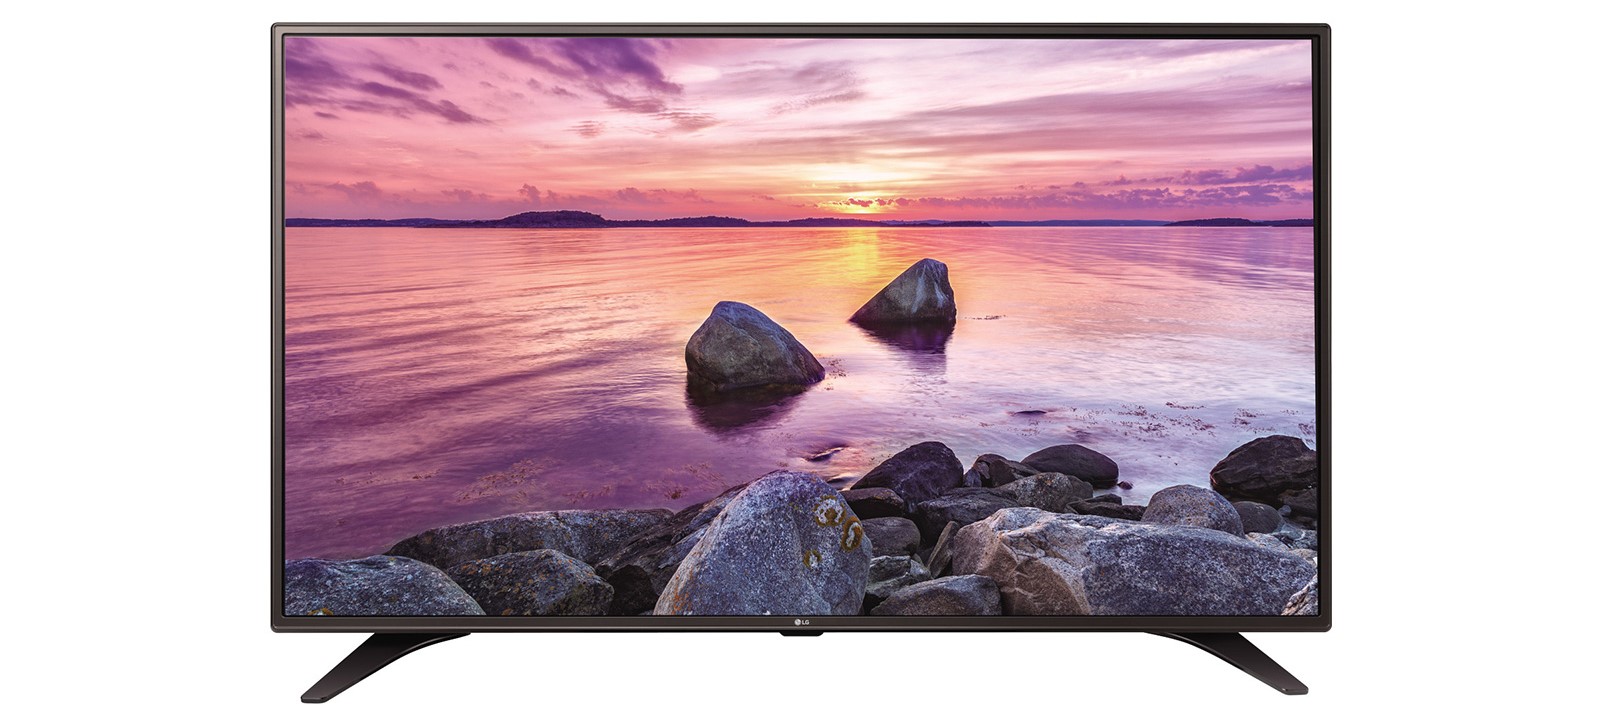 LG 55LV340C 55 inch 1080p Commercial TV with Wake on LAN